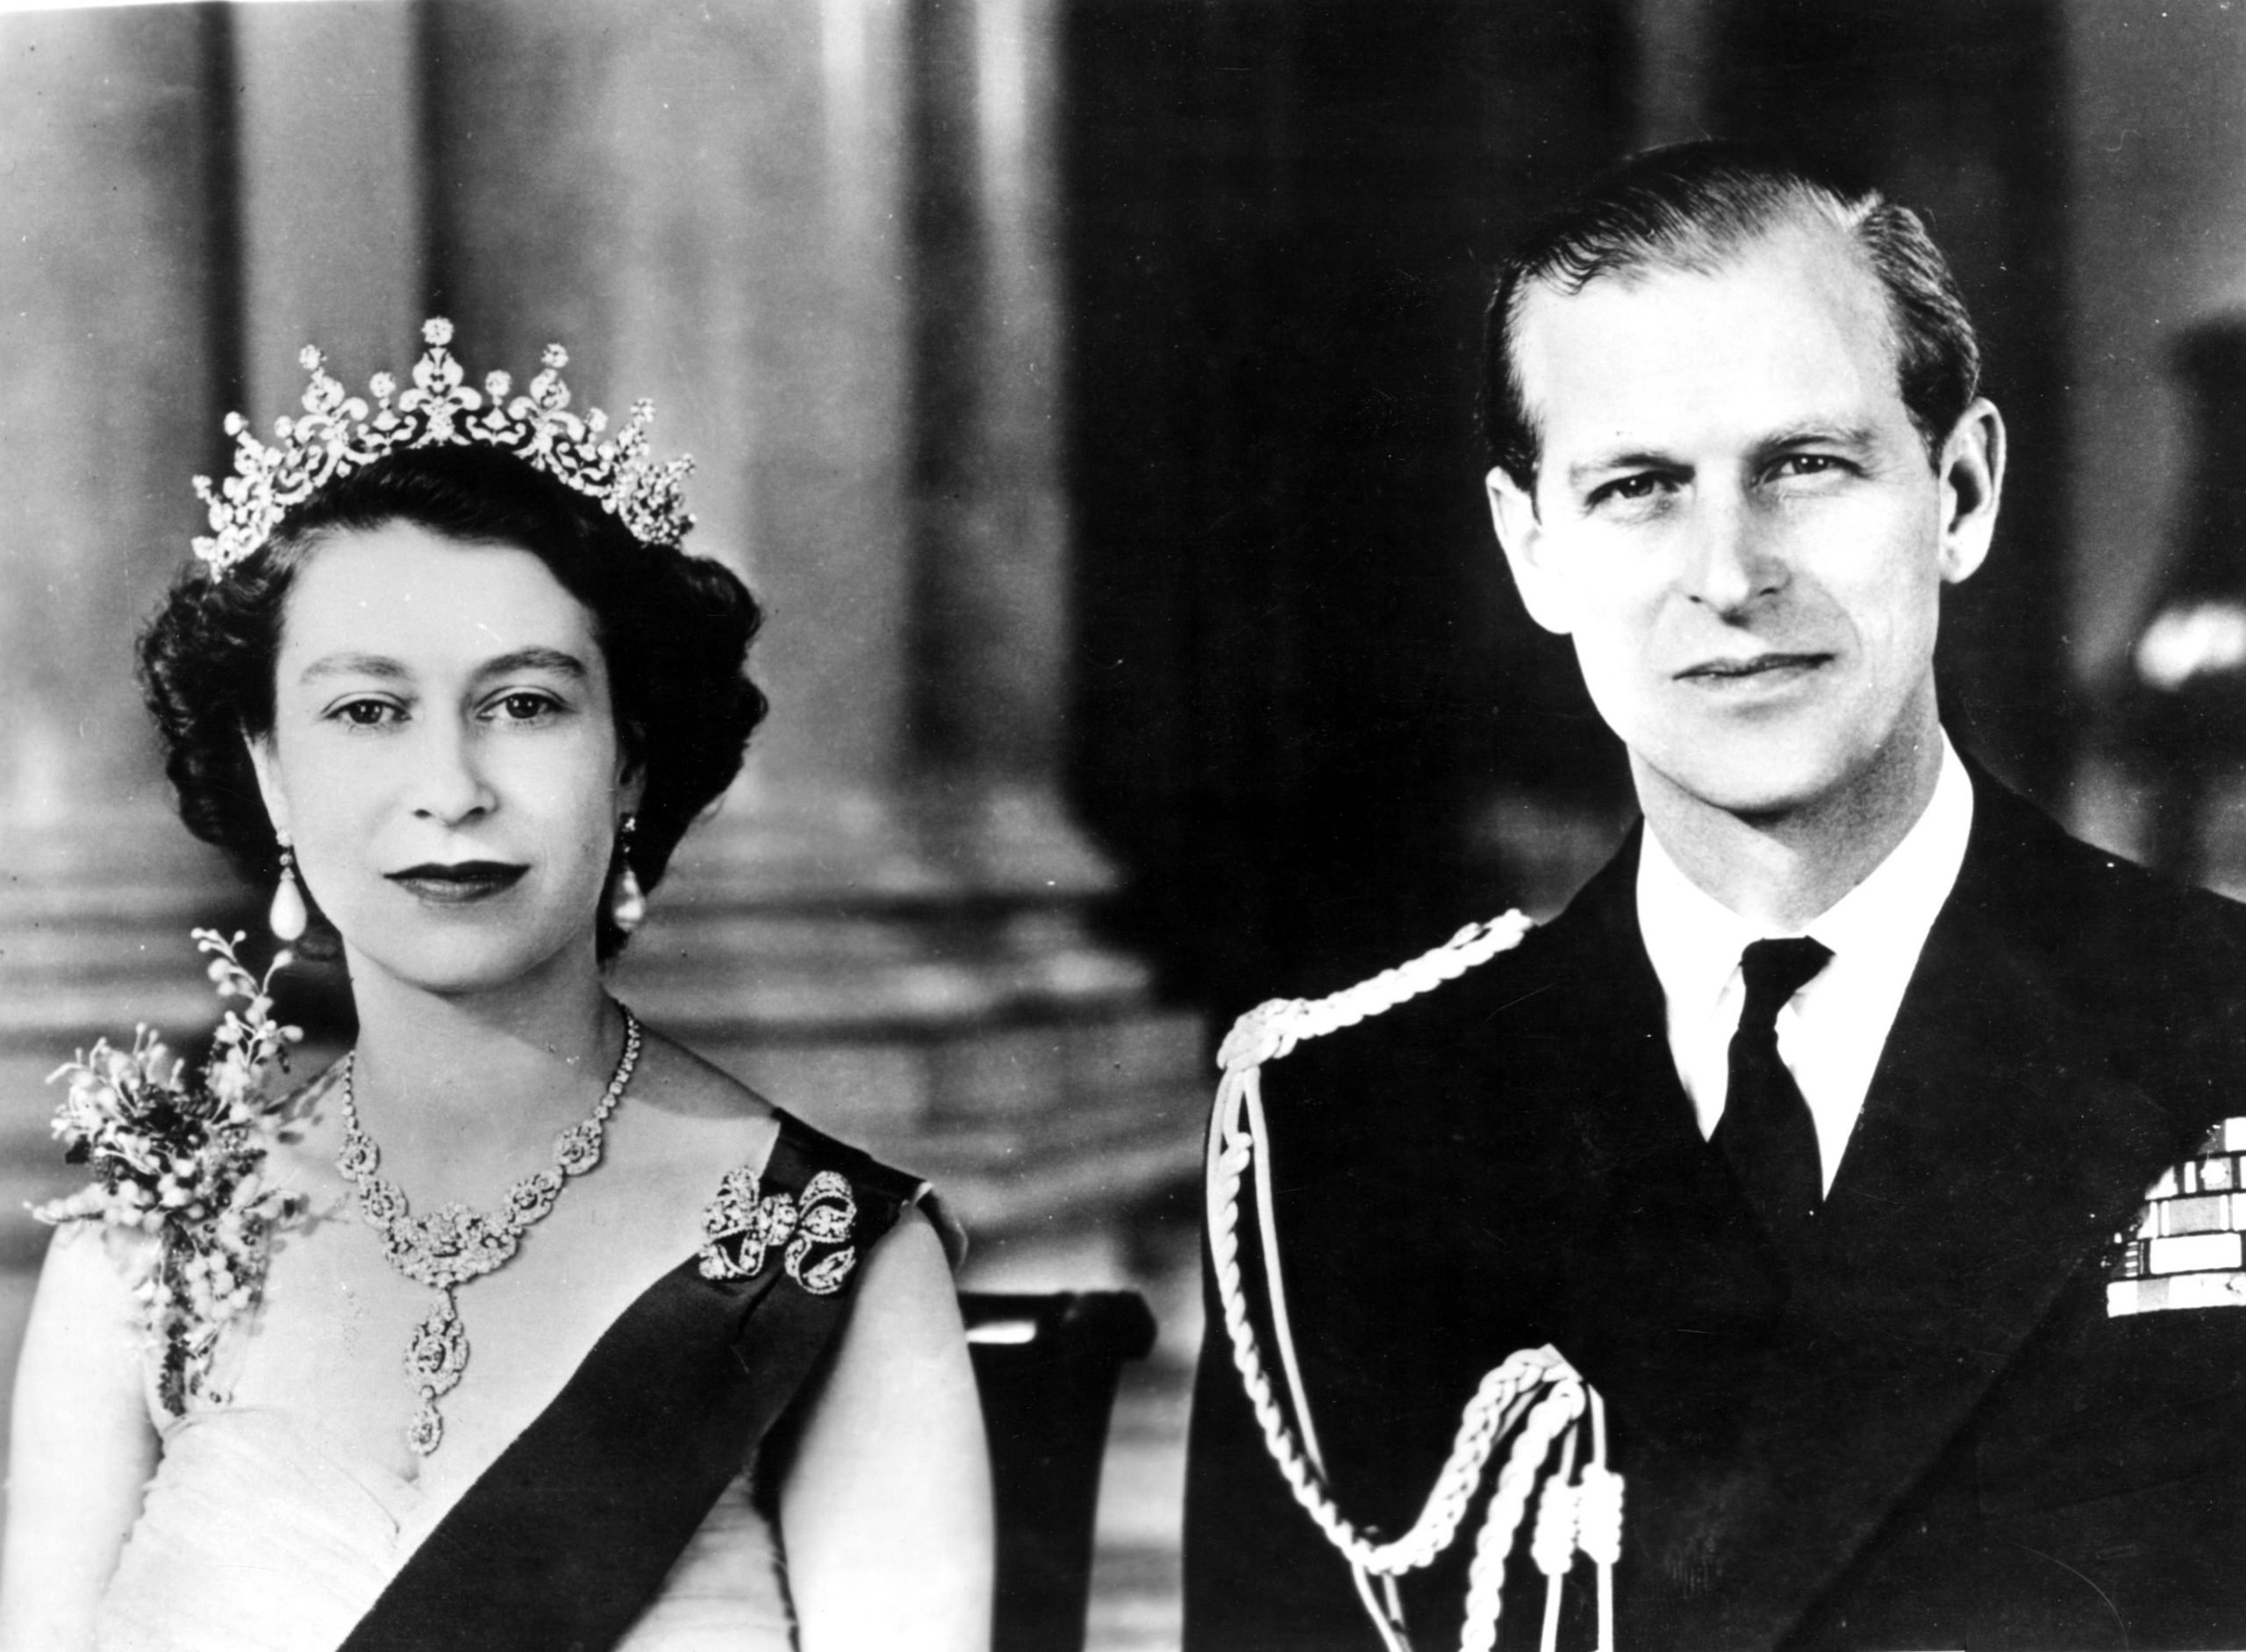 Even as a young woman, Queen Elizabeth II vowed to never abdicate